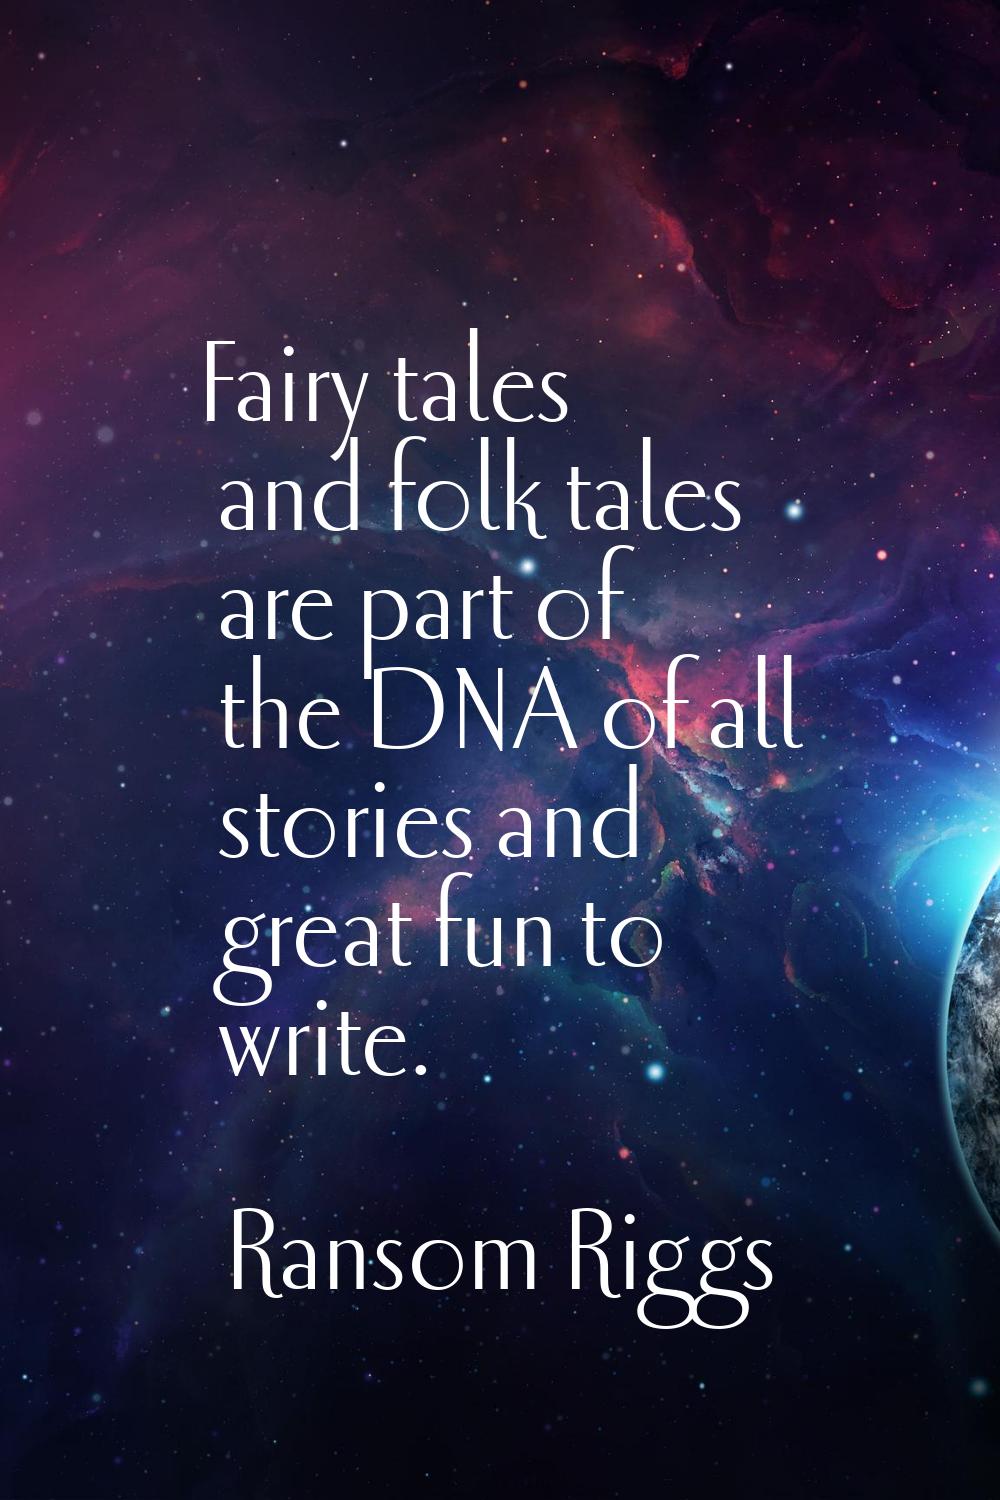 Fairy tales and folk tales are part of the DNA of all stories and great fun to write.